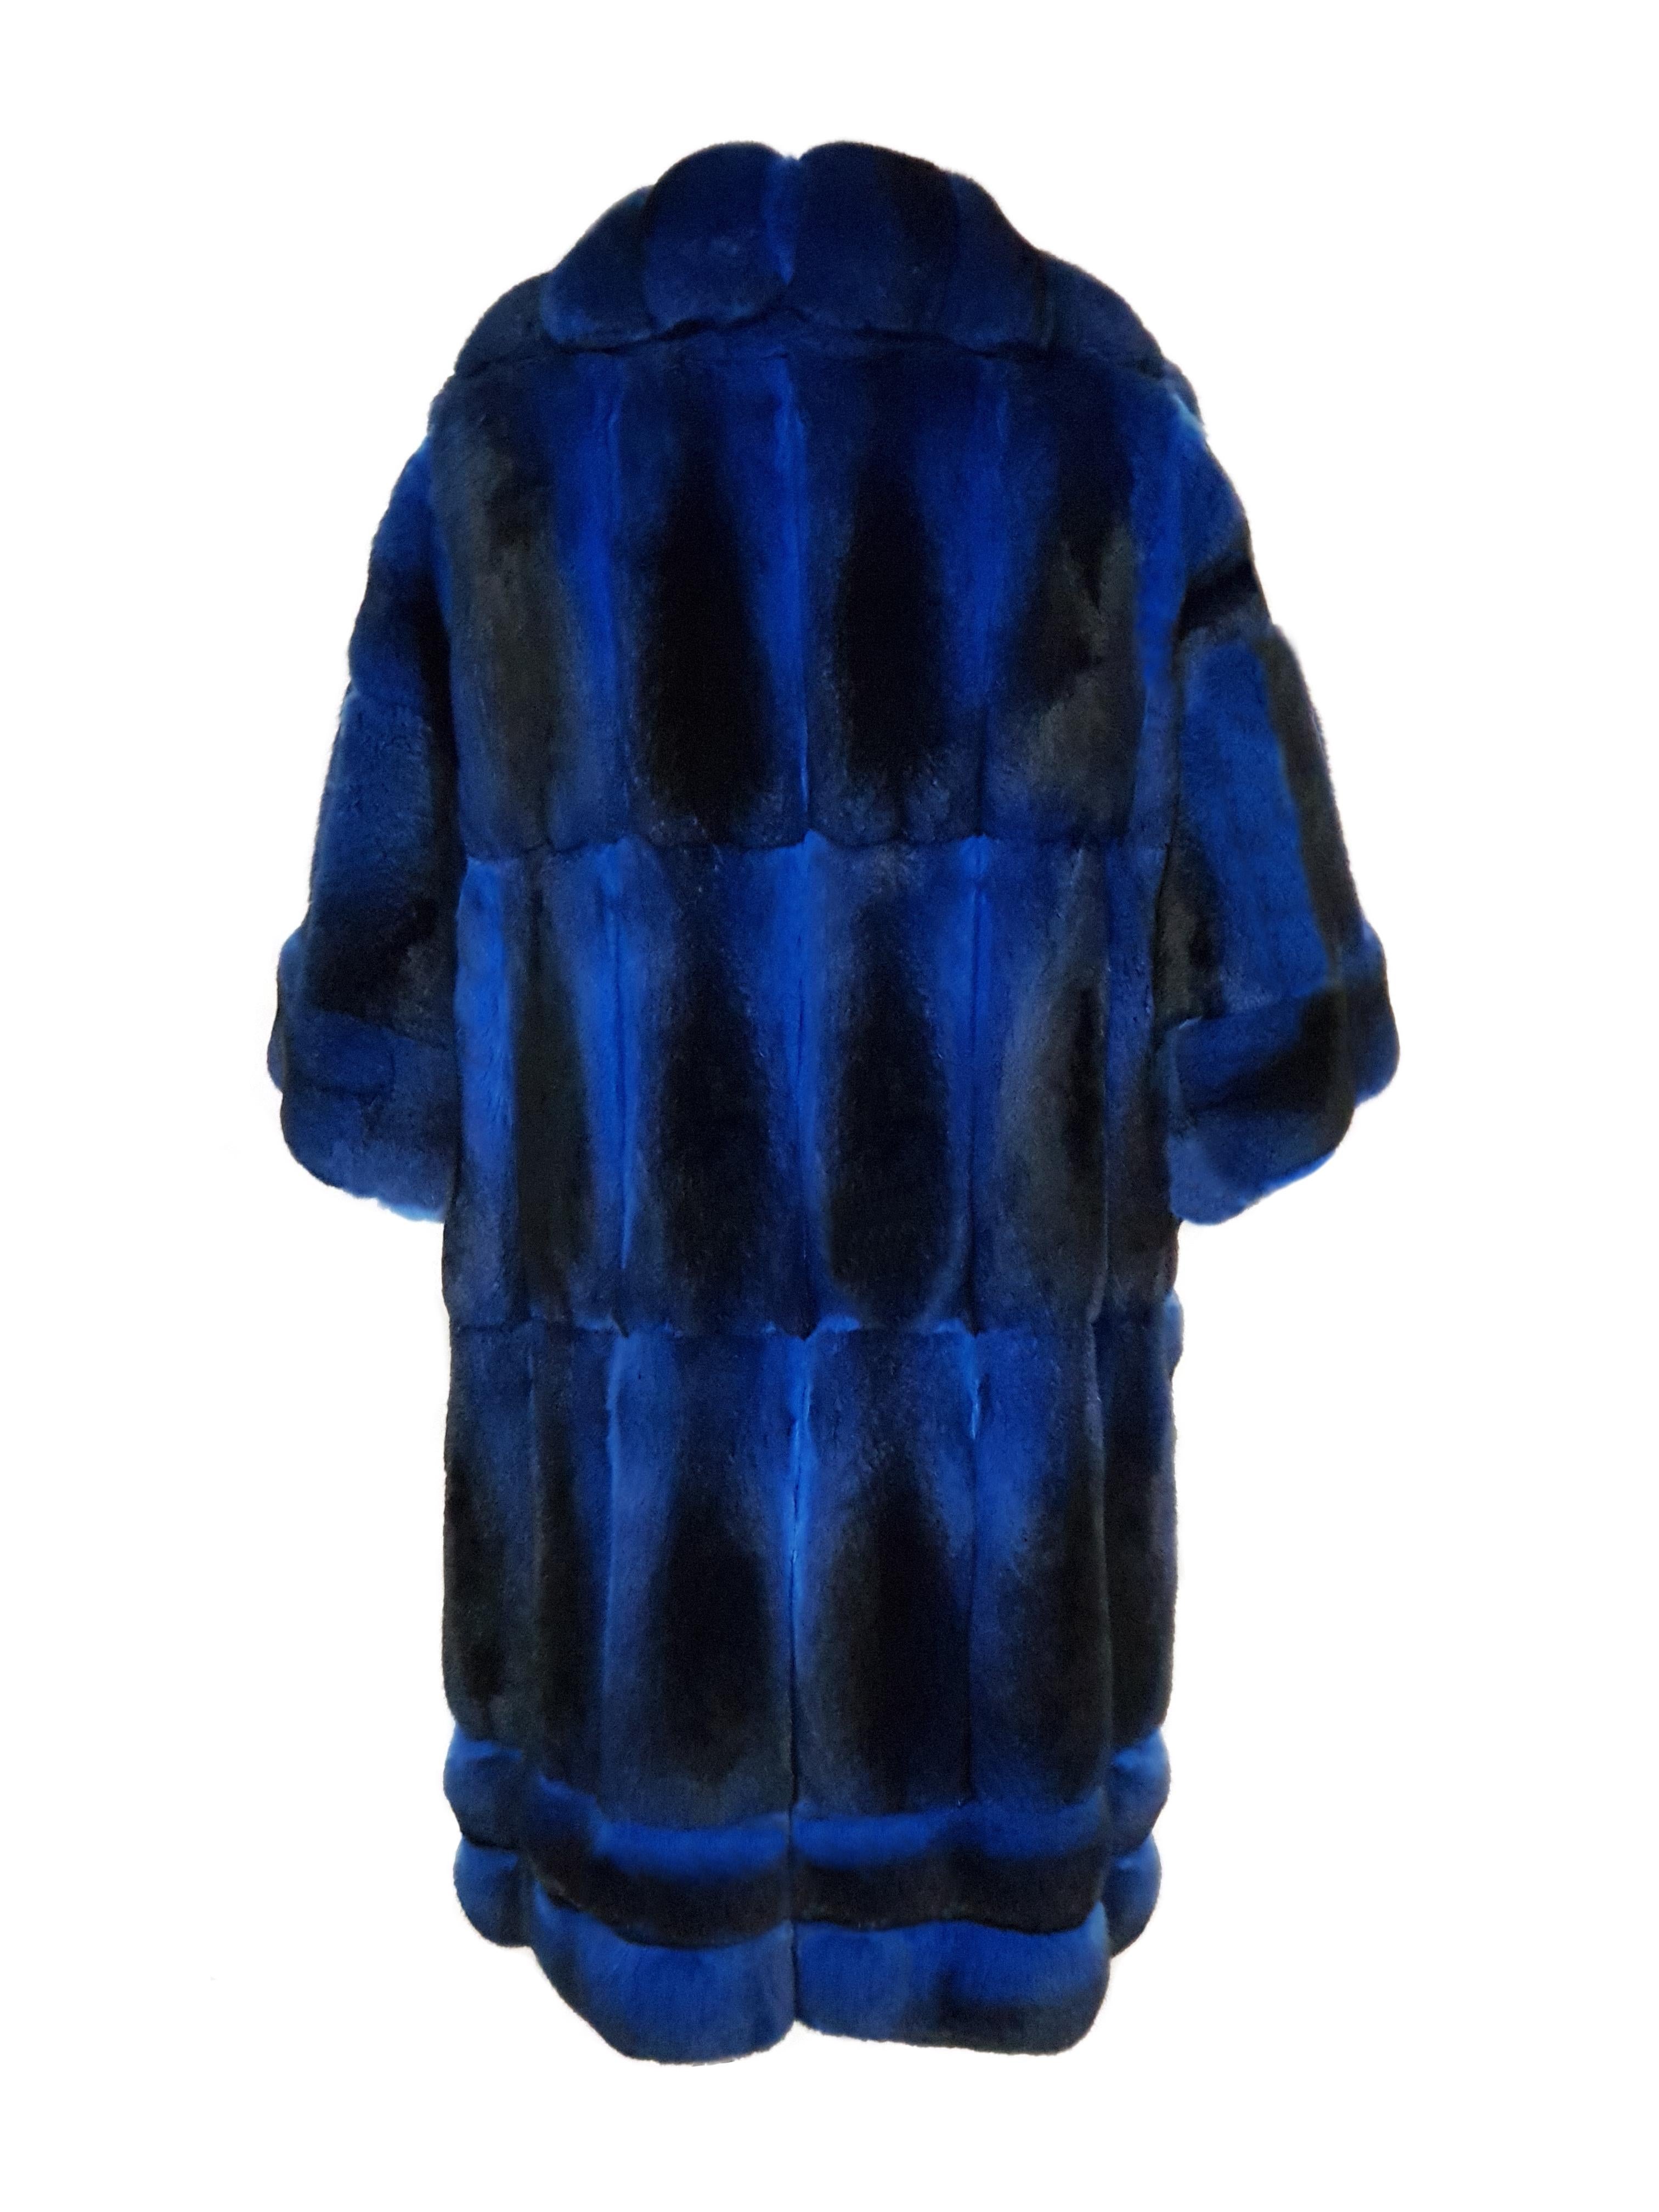 Dyed Navy-Blue Chinchilla Coat with 3/4 sleeves. Helen Yarmak exclusive 100% silk lining. 